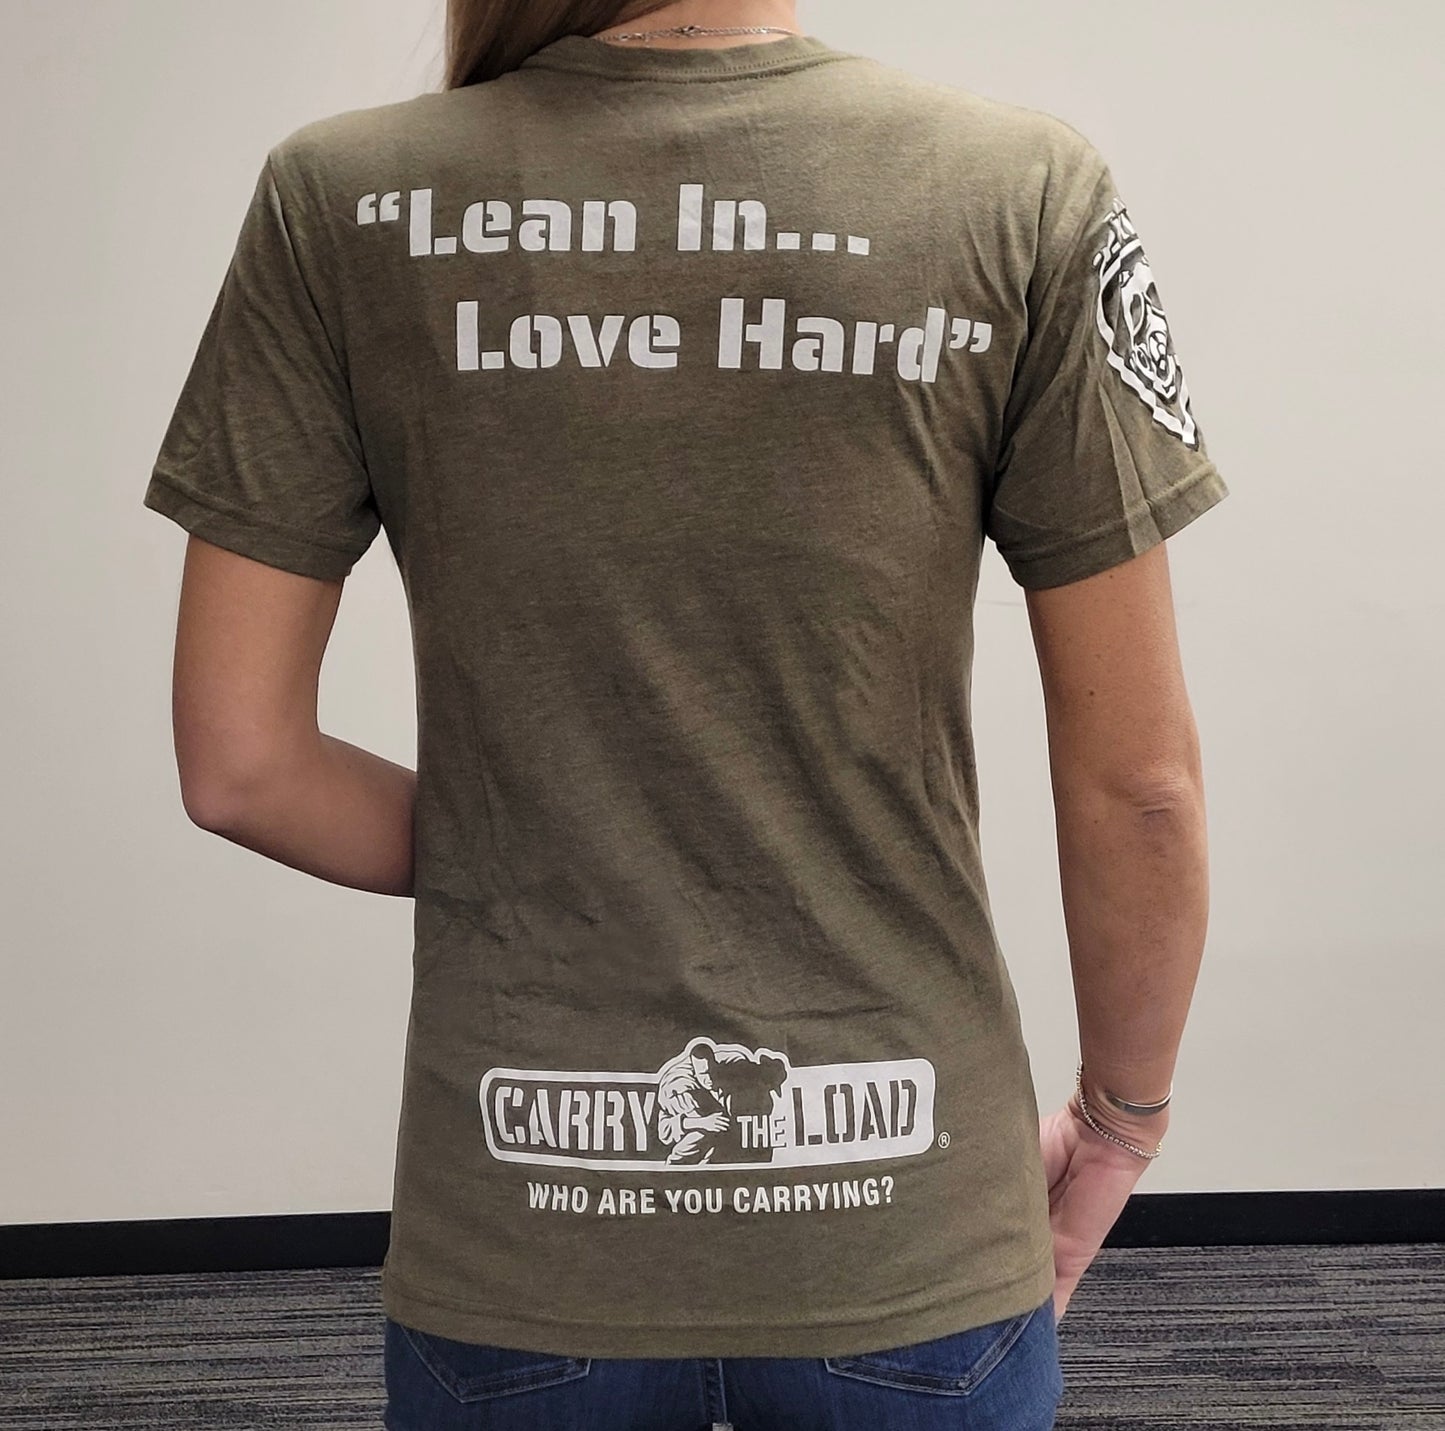 Carry The Load 2023 T-Shirt with white OTF shield on front. "Lean In, Love Hard" on back. Tri-blend material in ODG.